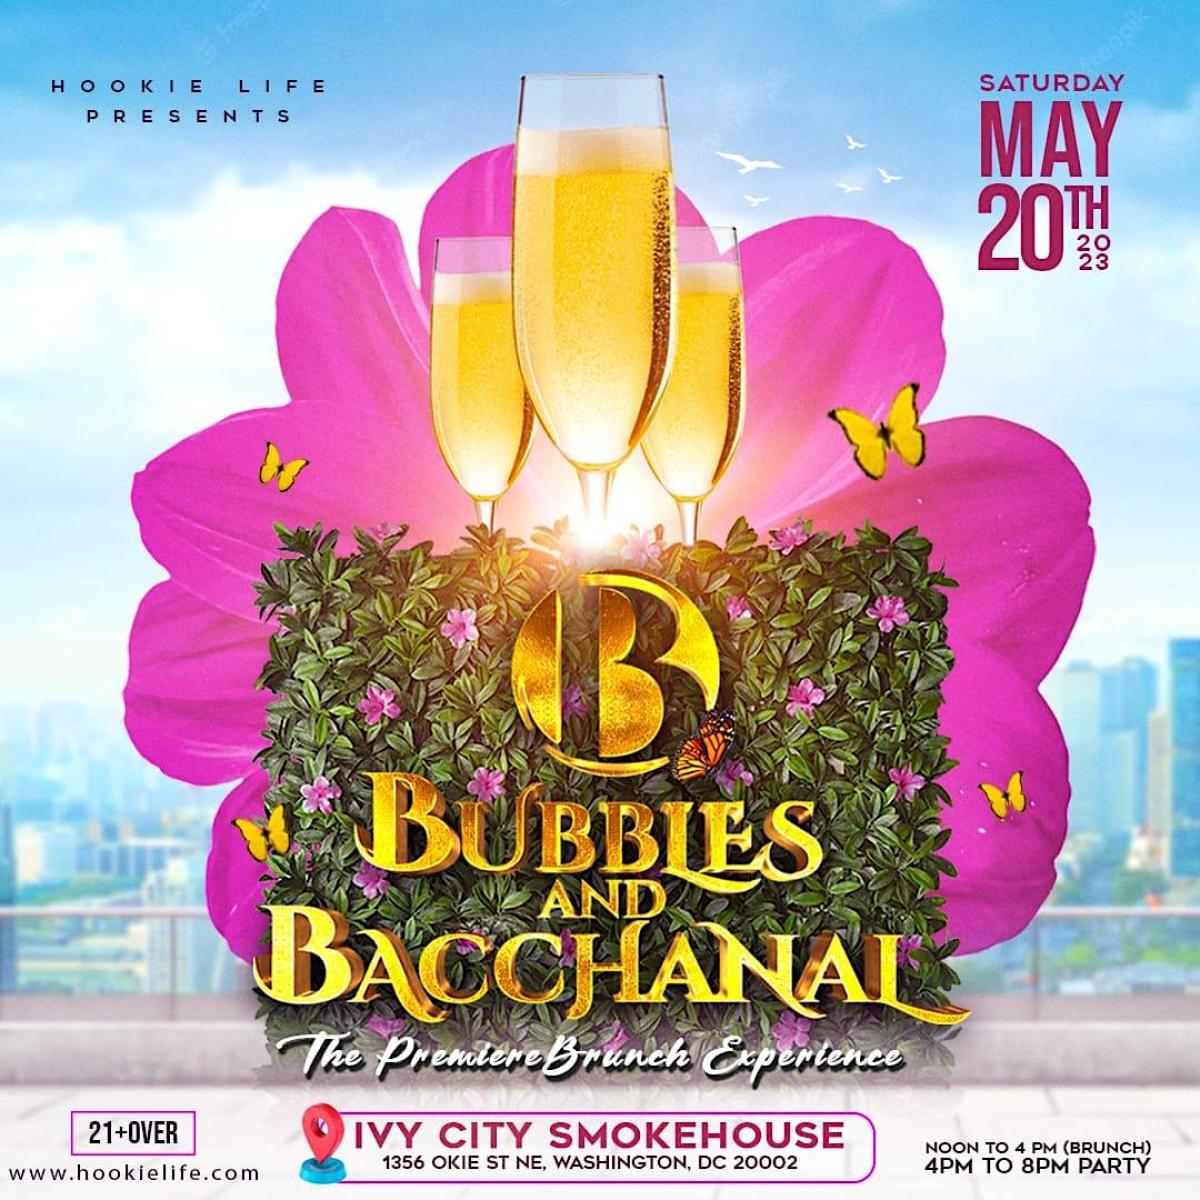 Bubbles & Bacchanal: The Brunch & Day Party Experience flyer or graphic.